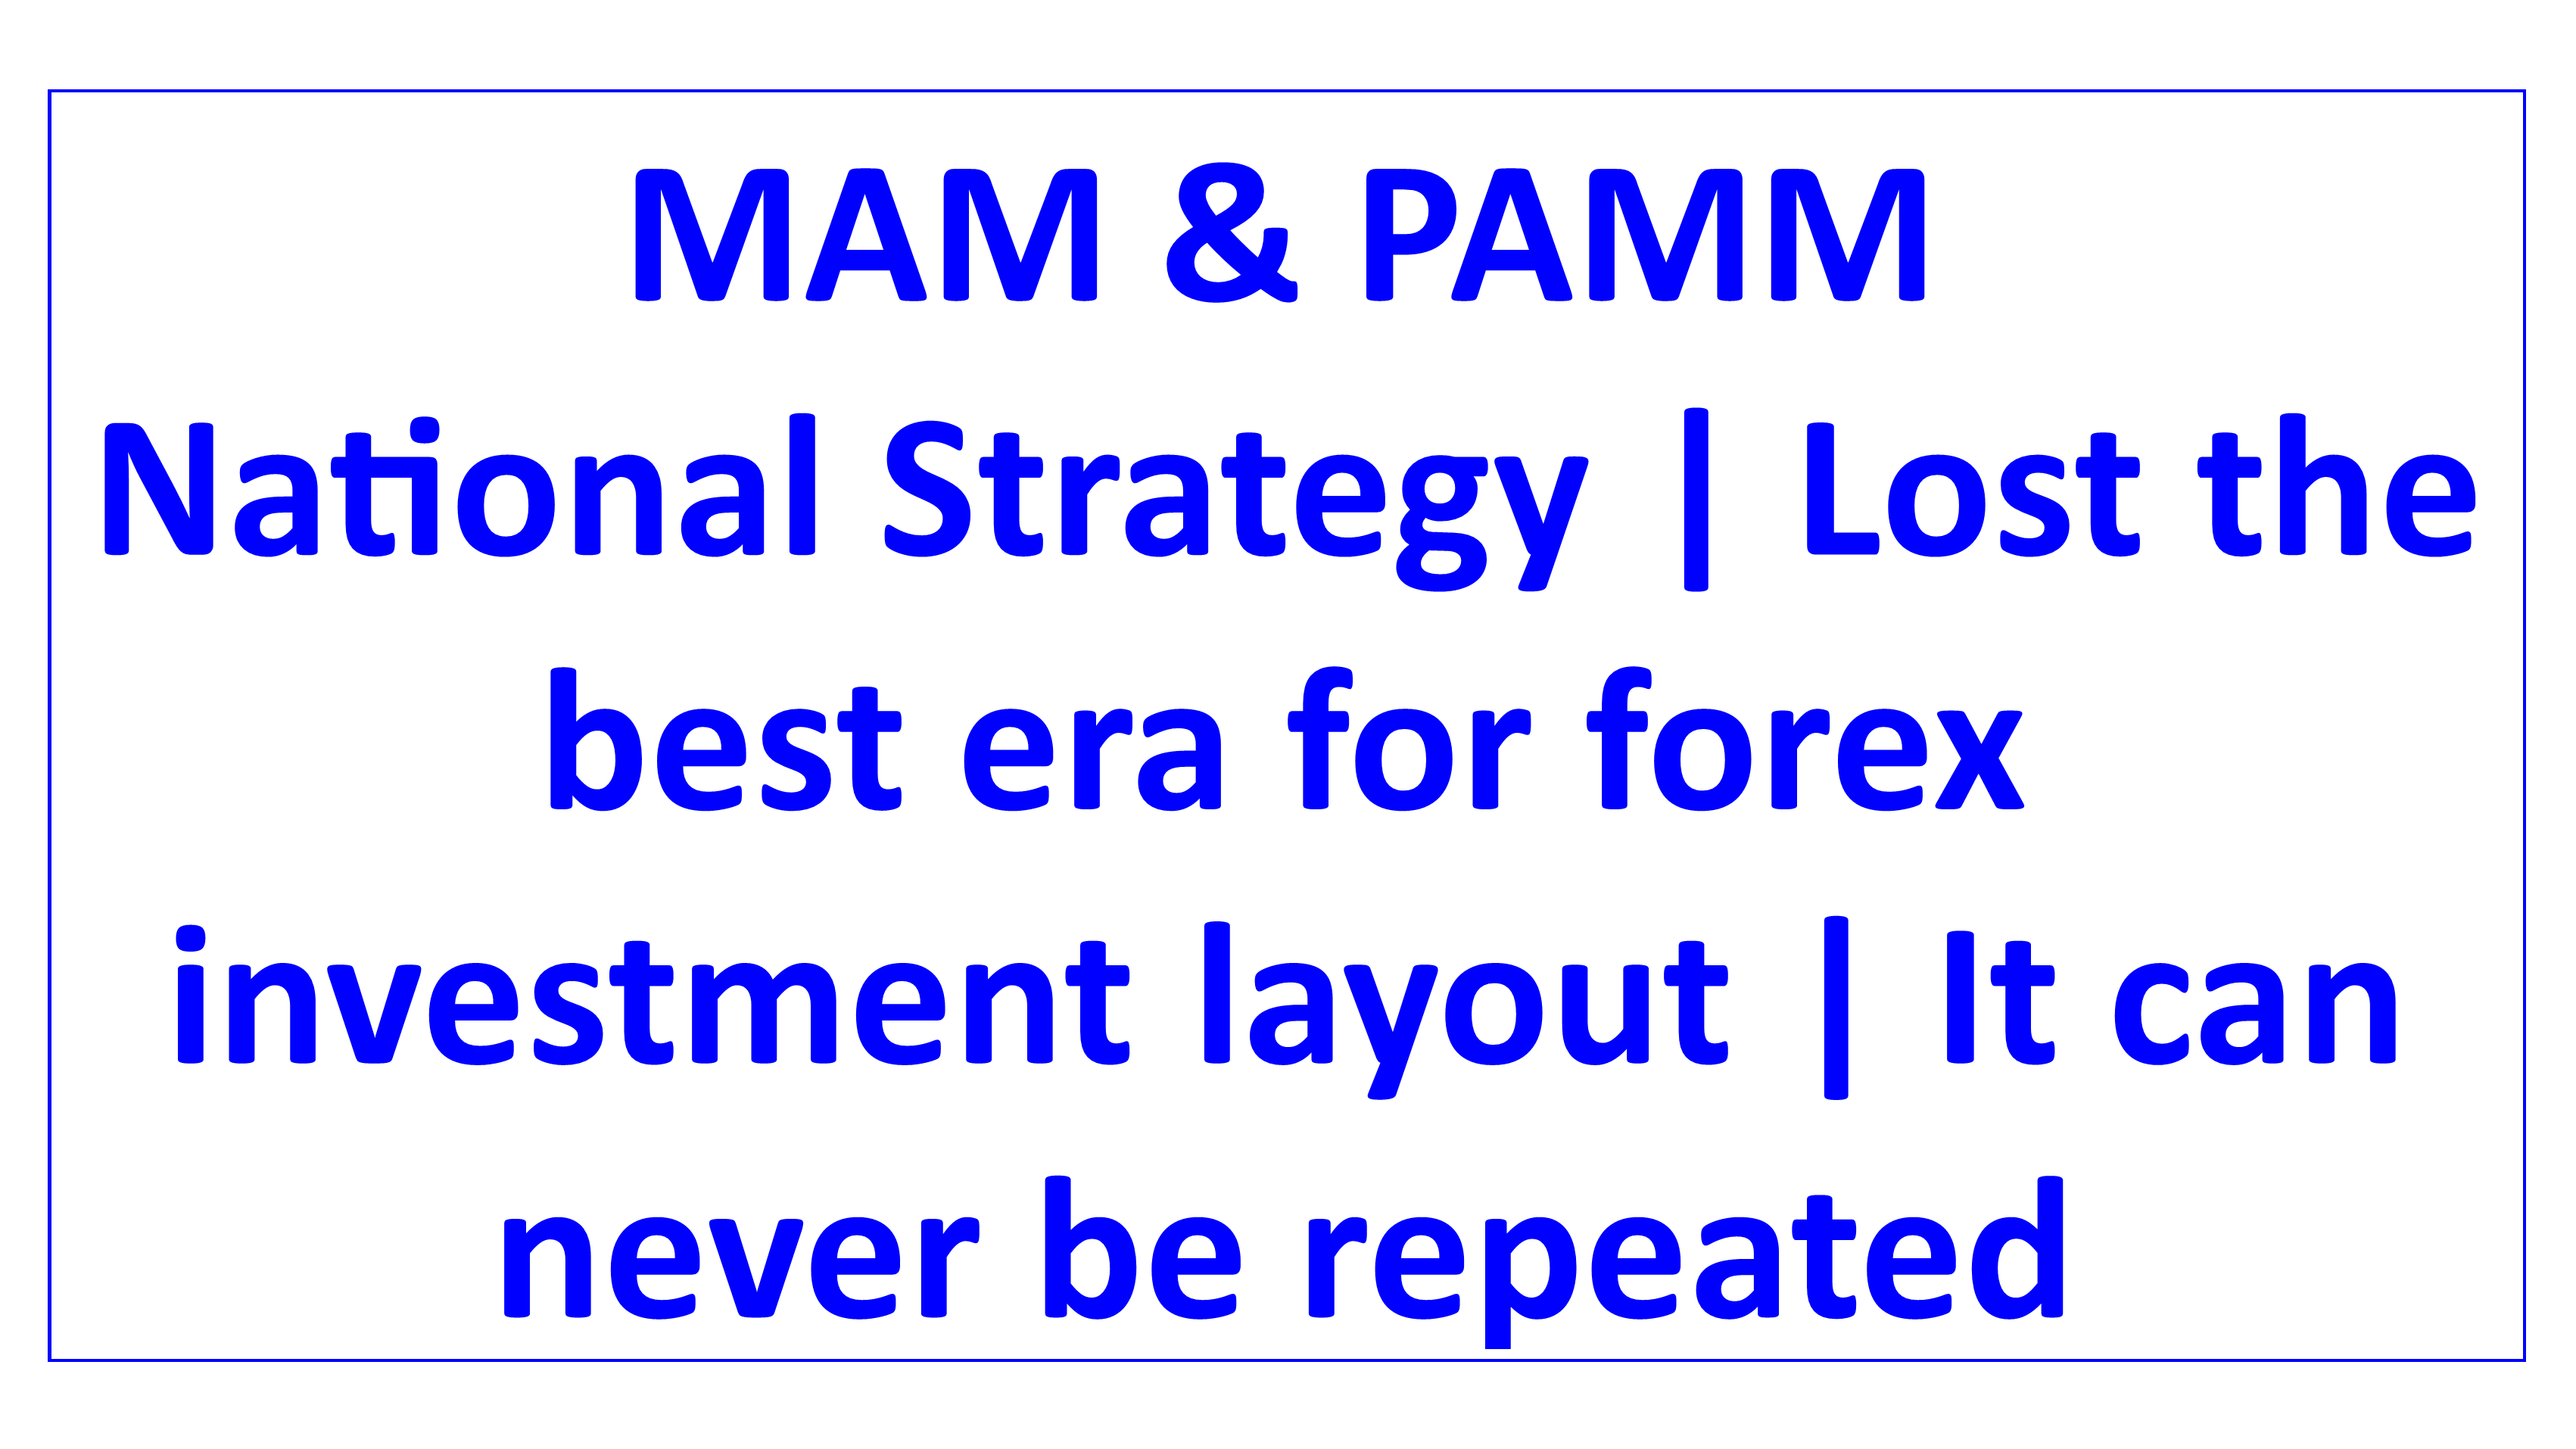 lost the best era for forex investment layout en